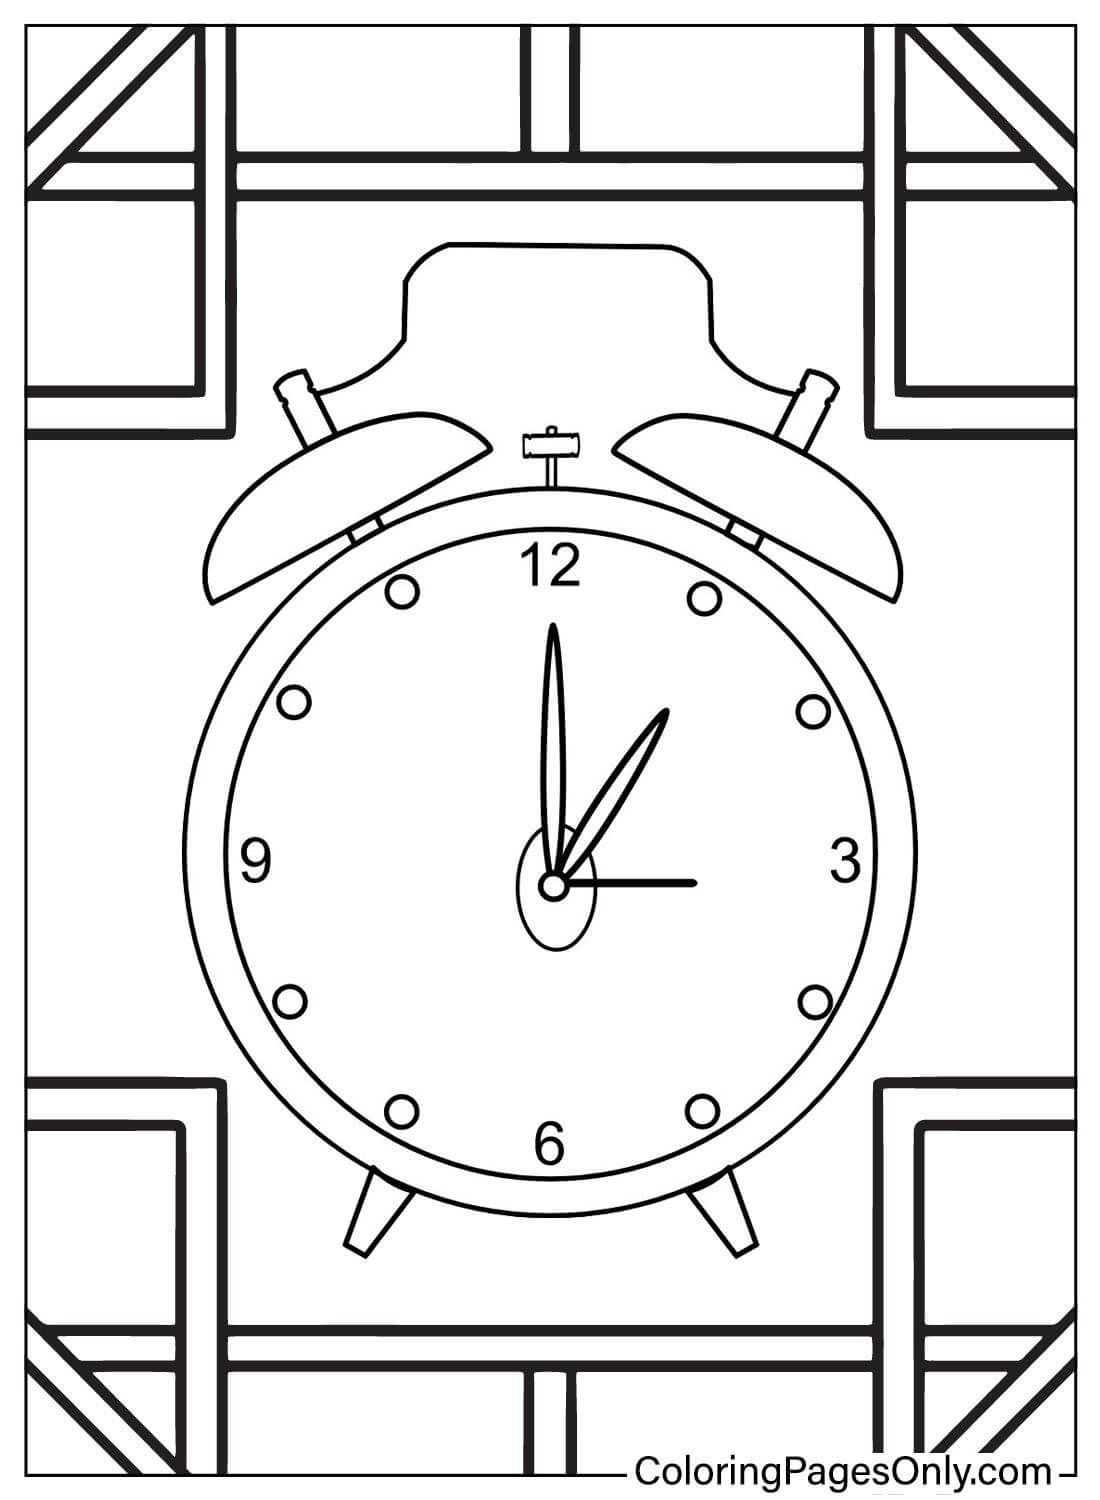 Coloring Page Alarm Clock from Alarm Clock